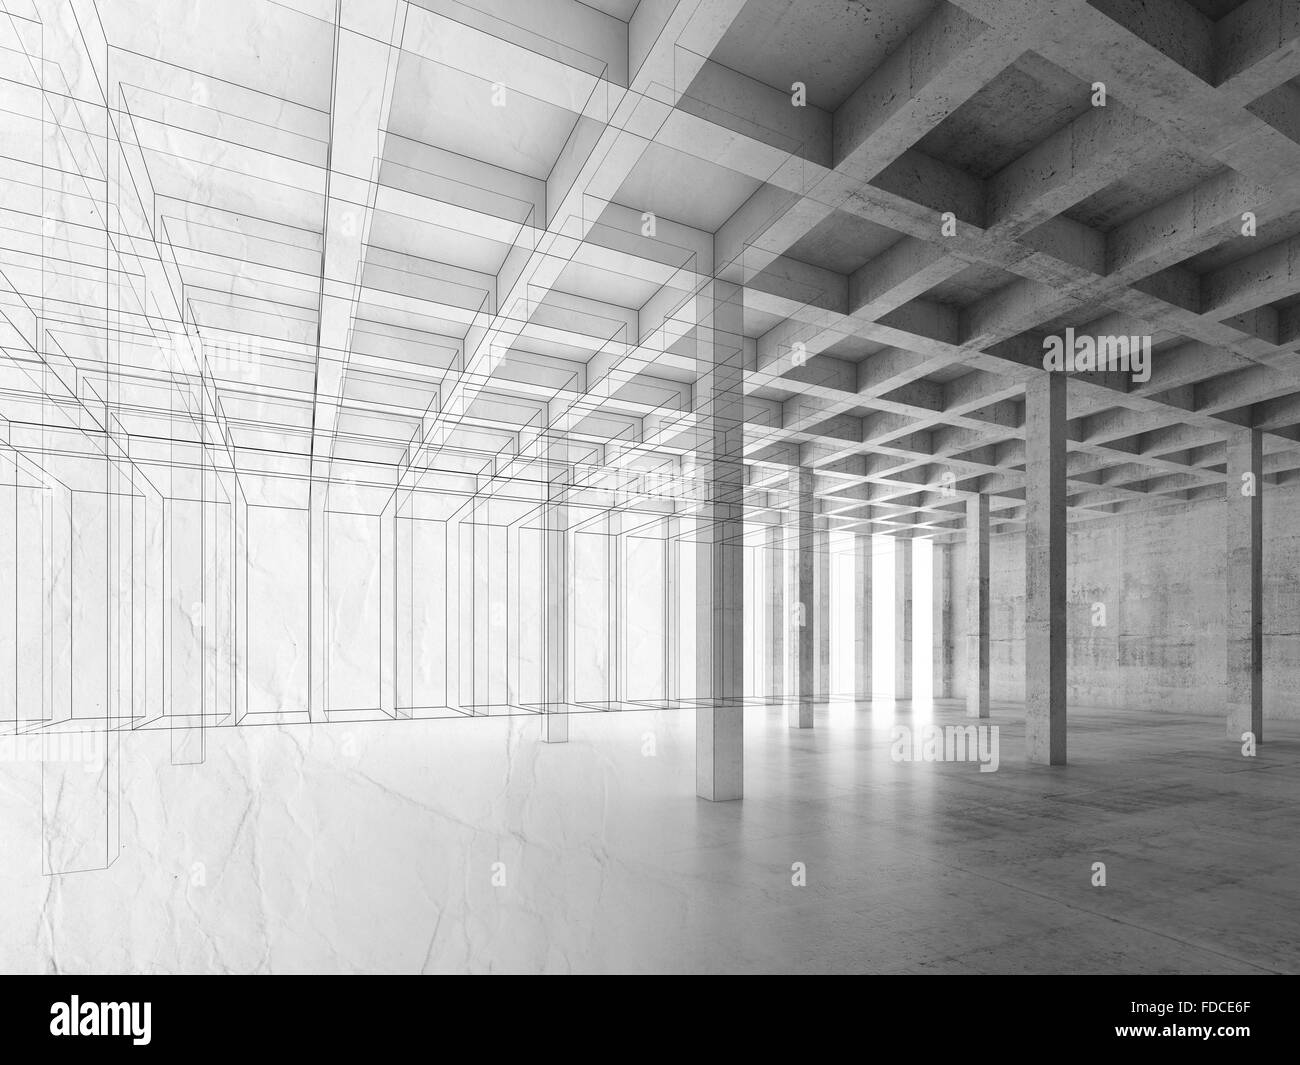 Abstract architecture background with interior of open space concrete room, 3d illustration, wire-frame effect Stock Photo